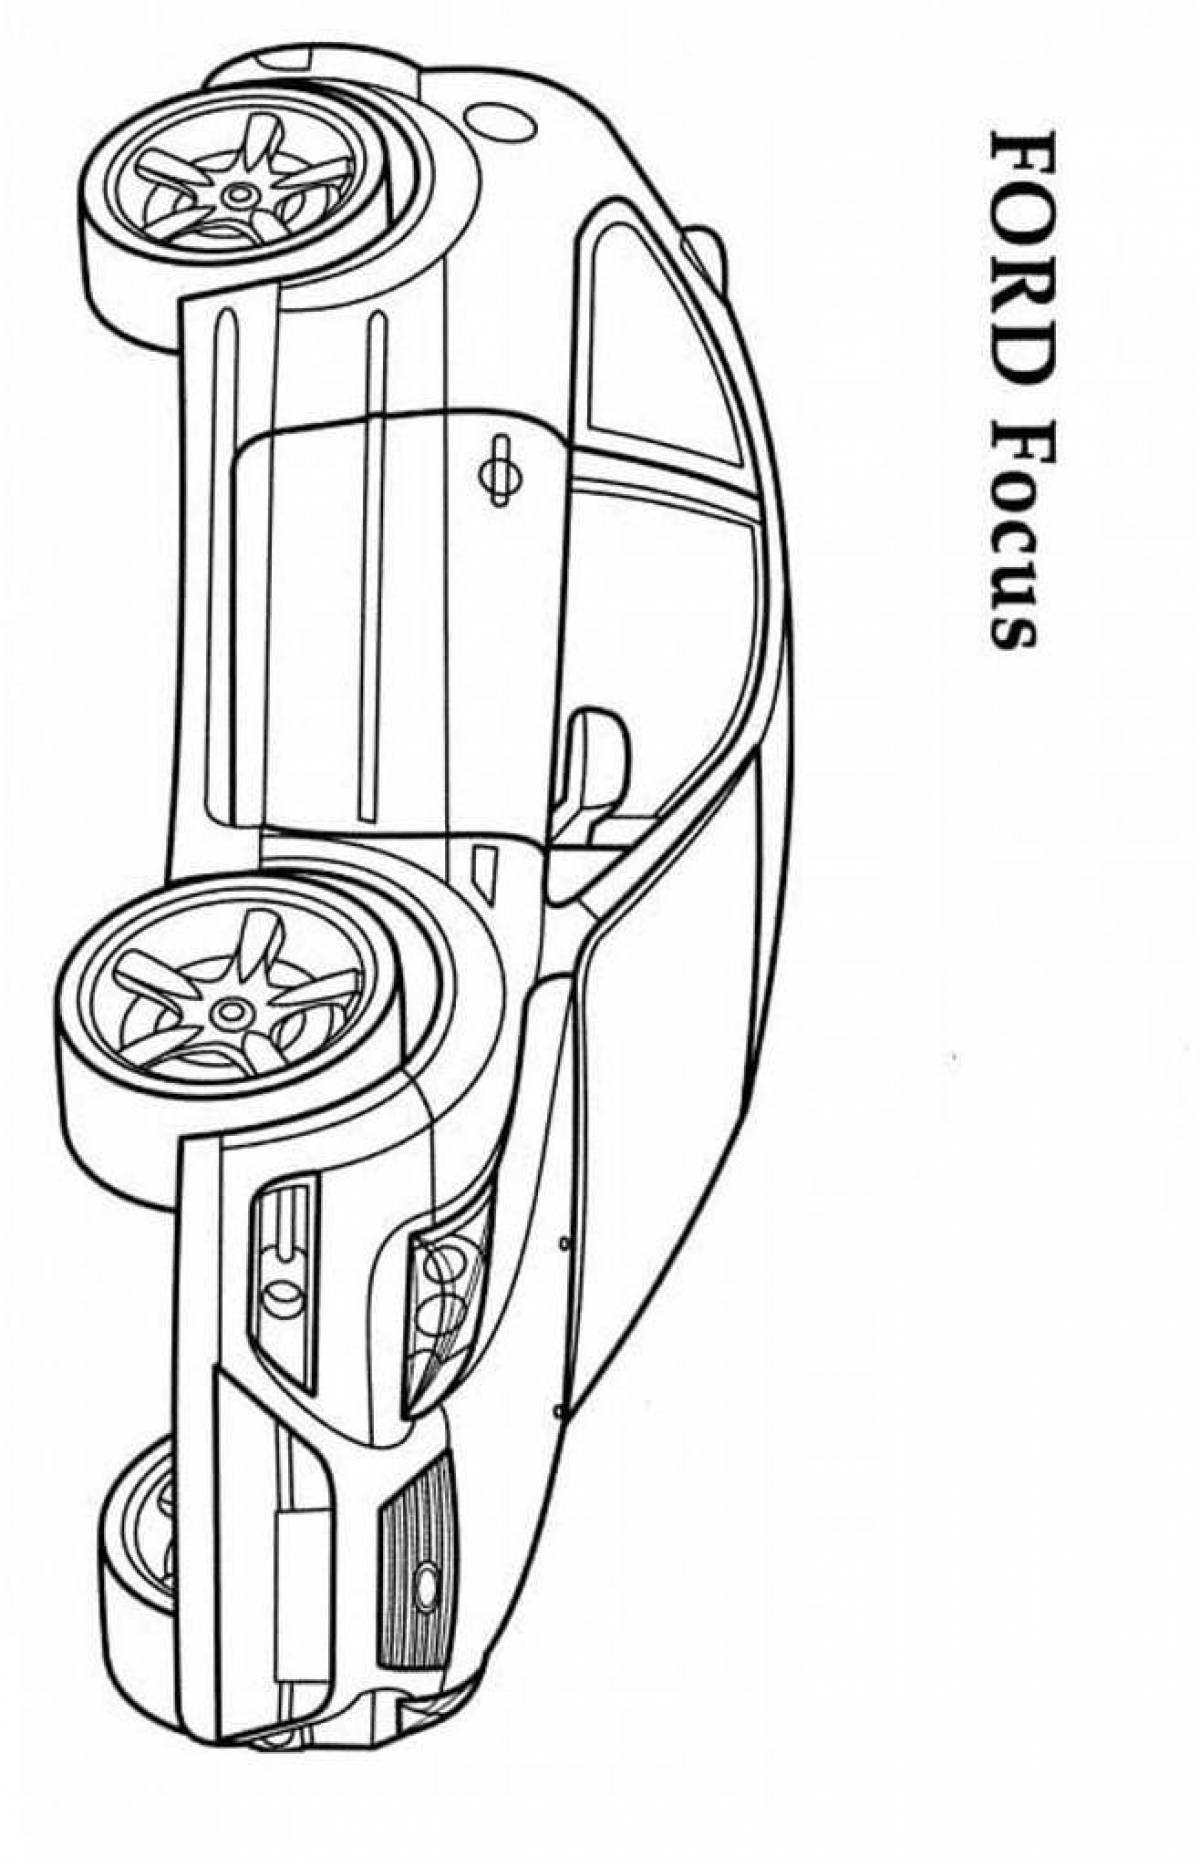 Joyful ford focus coloring page